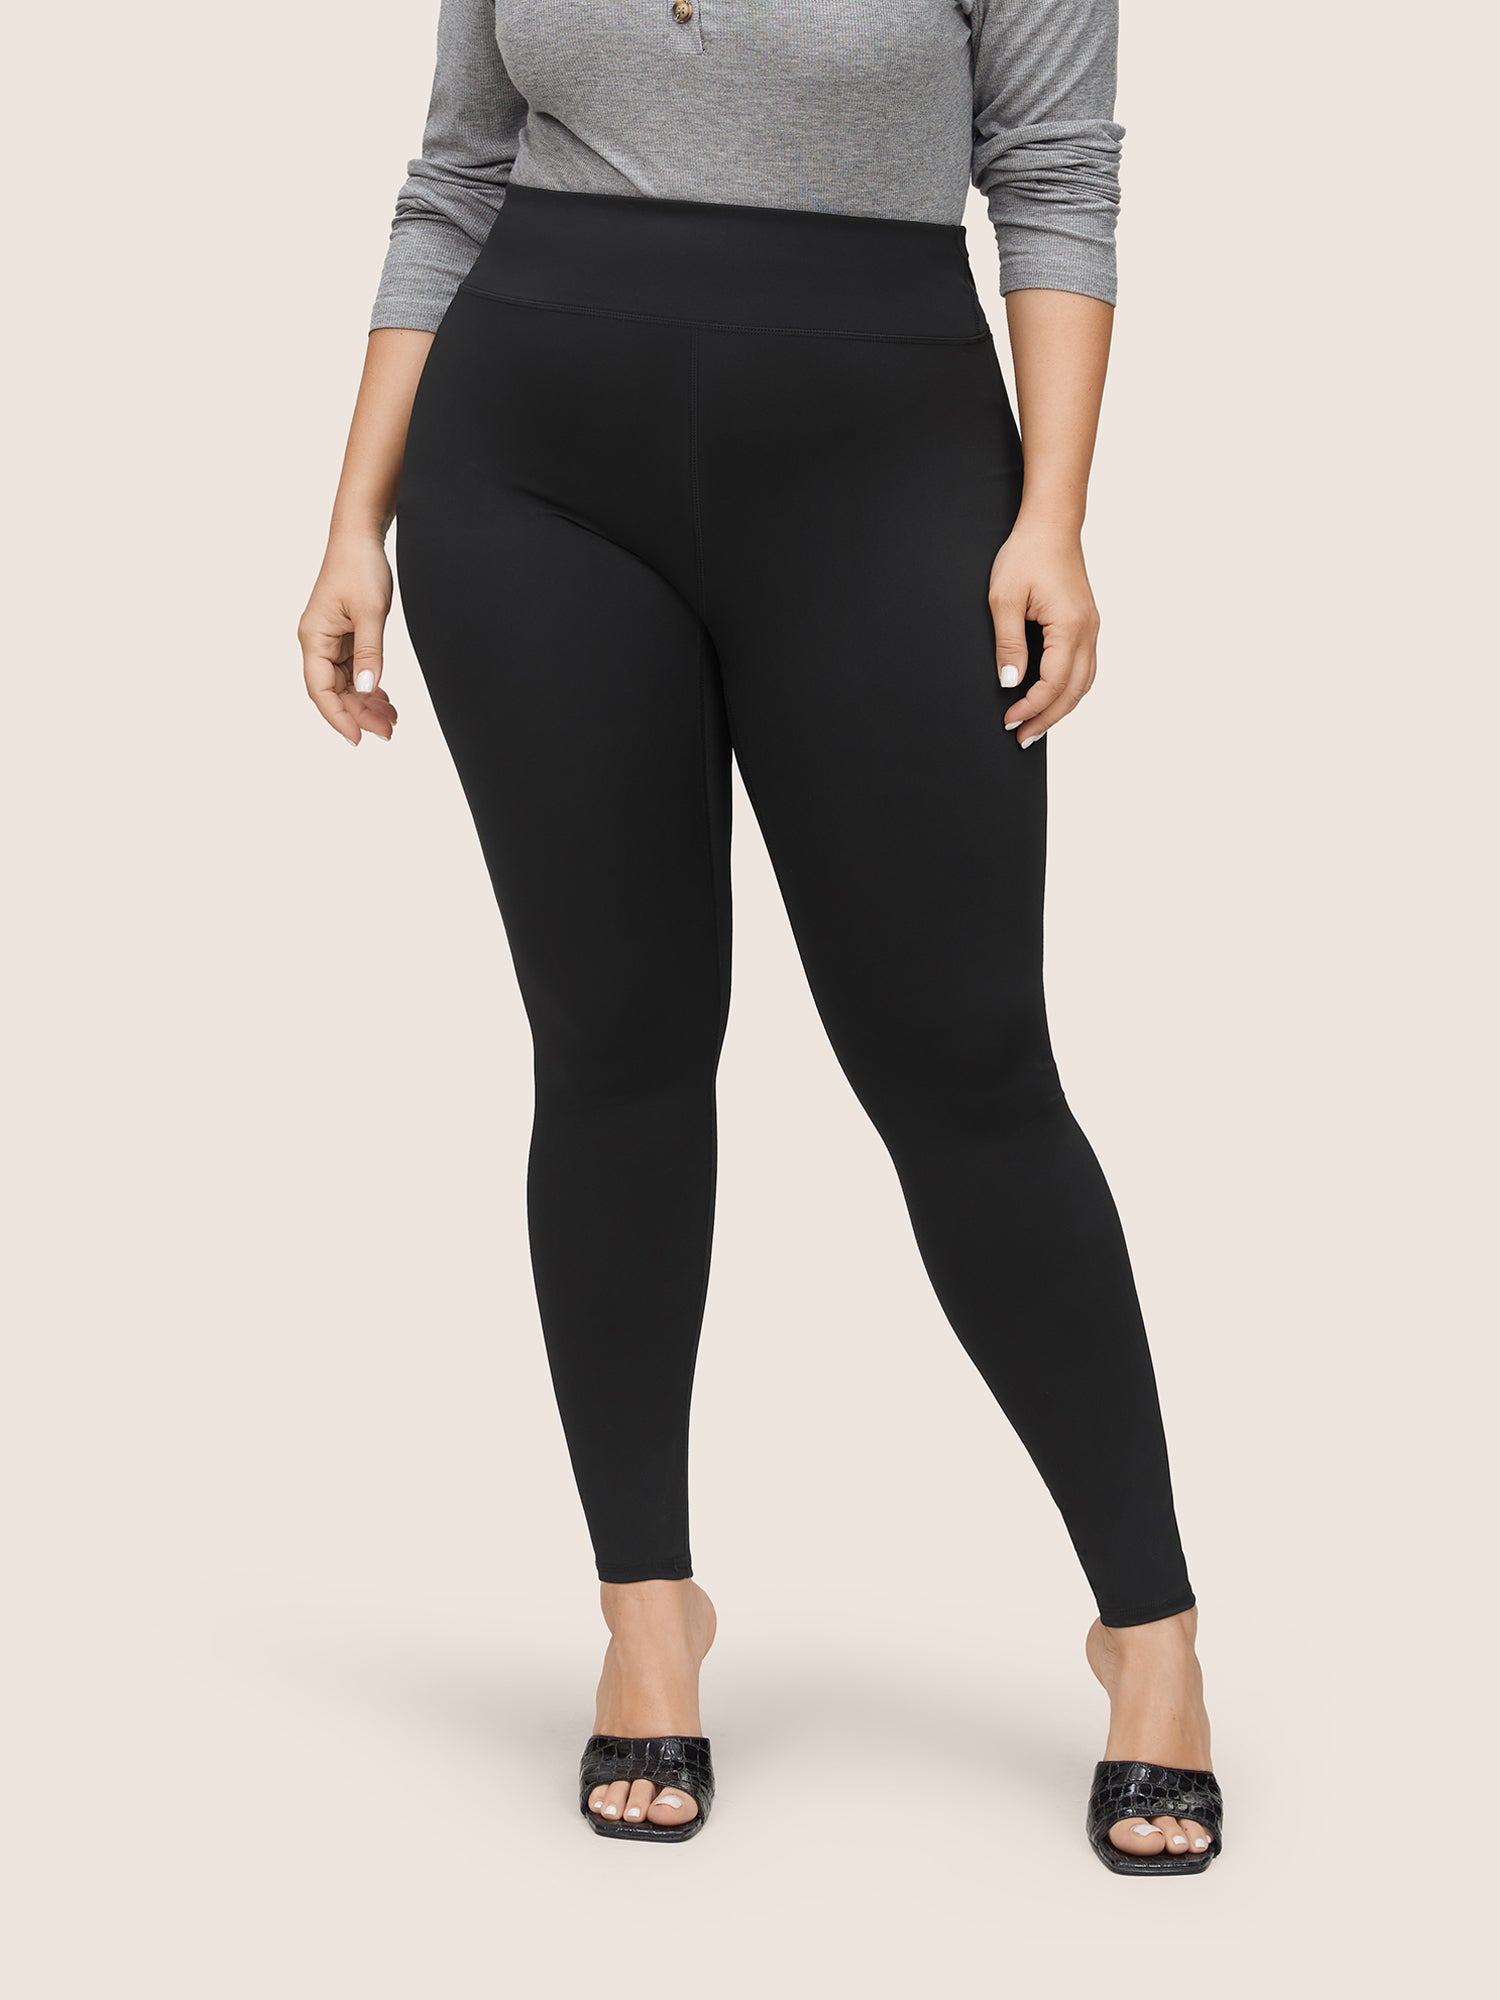 Image of Solid Seamless Butt Lifting High Rise Leggings